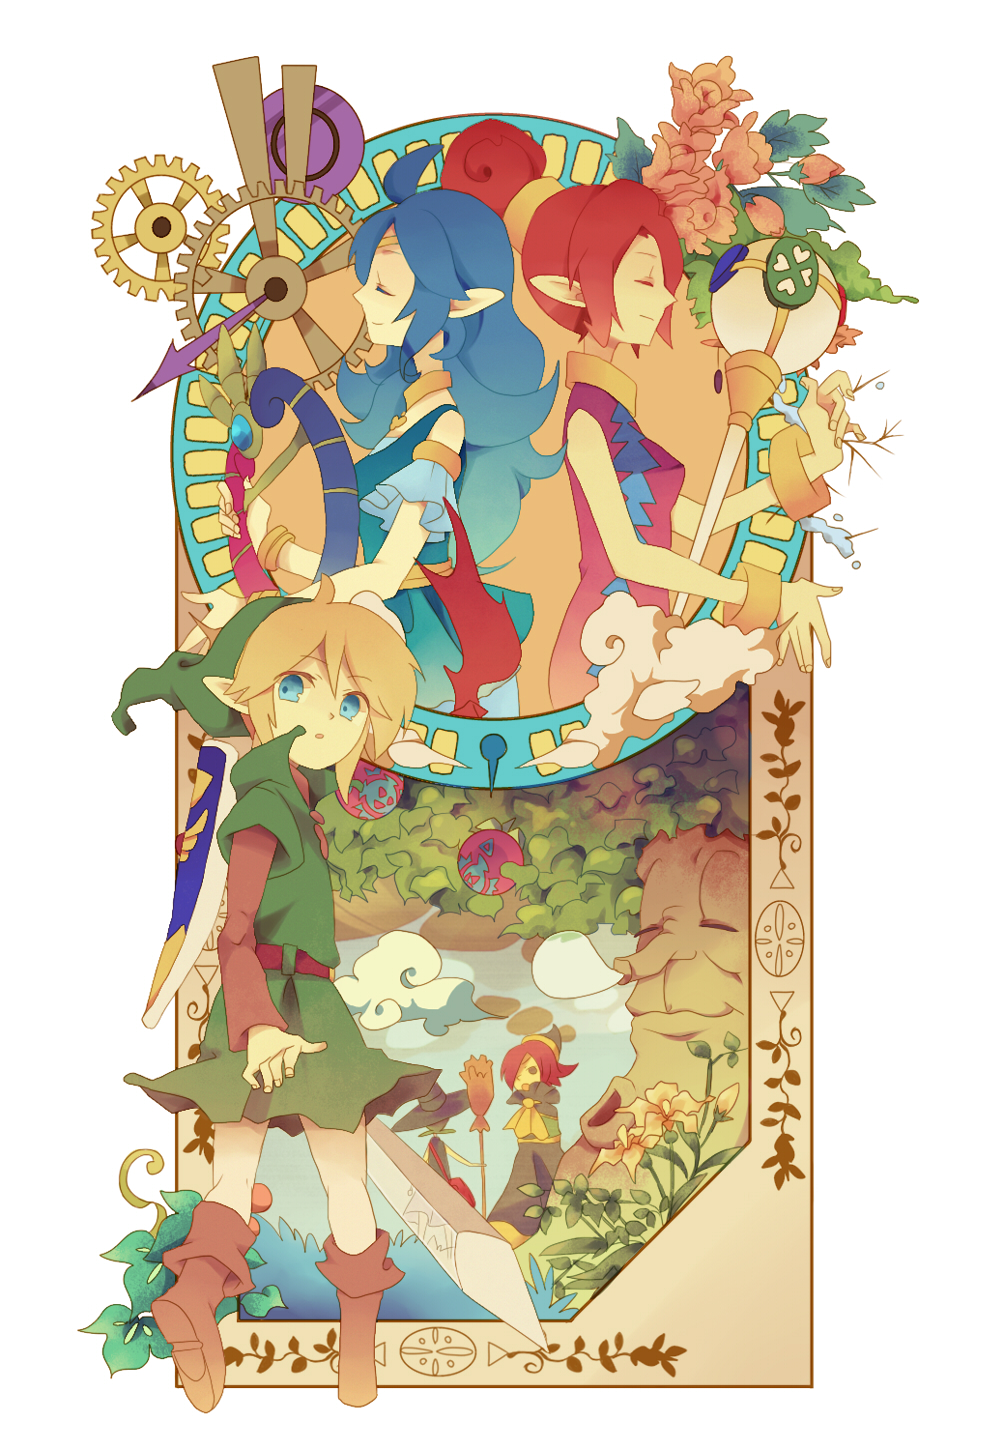 3girls blonde_hair blue_eyes blue_hair broom closed_eyes cloud clouds din eyes_closed frame harp hat highres instrument link long_hair maple_(legend_of_zelda) maple_(the_legend_of_zelda) martha multiple_boys multiple_girls nayru oracle_of_ages oracle_of_seasons pointy_ears ralph_(legend_of_zelda) ralph_(the_legend_of_zelda) red_hair redhead scepter shield sword the_legend_of_zelda tree weapon witch_hat wristband yachi_kou